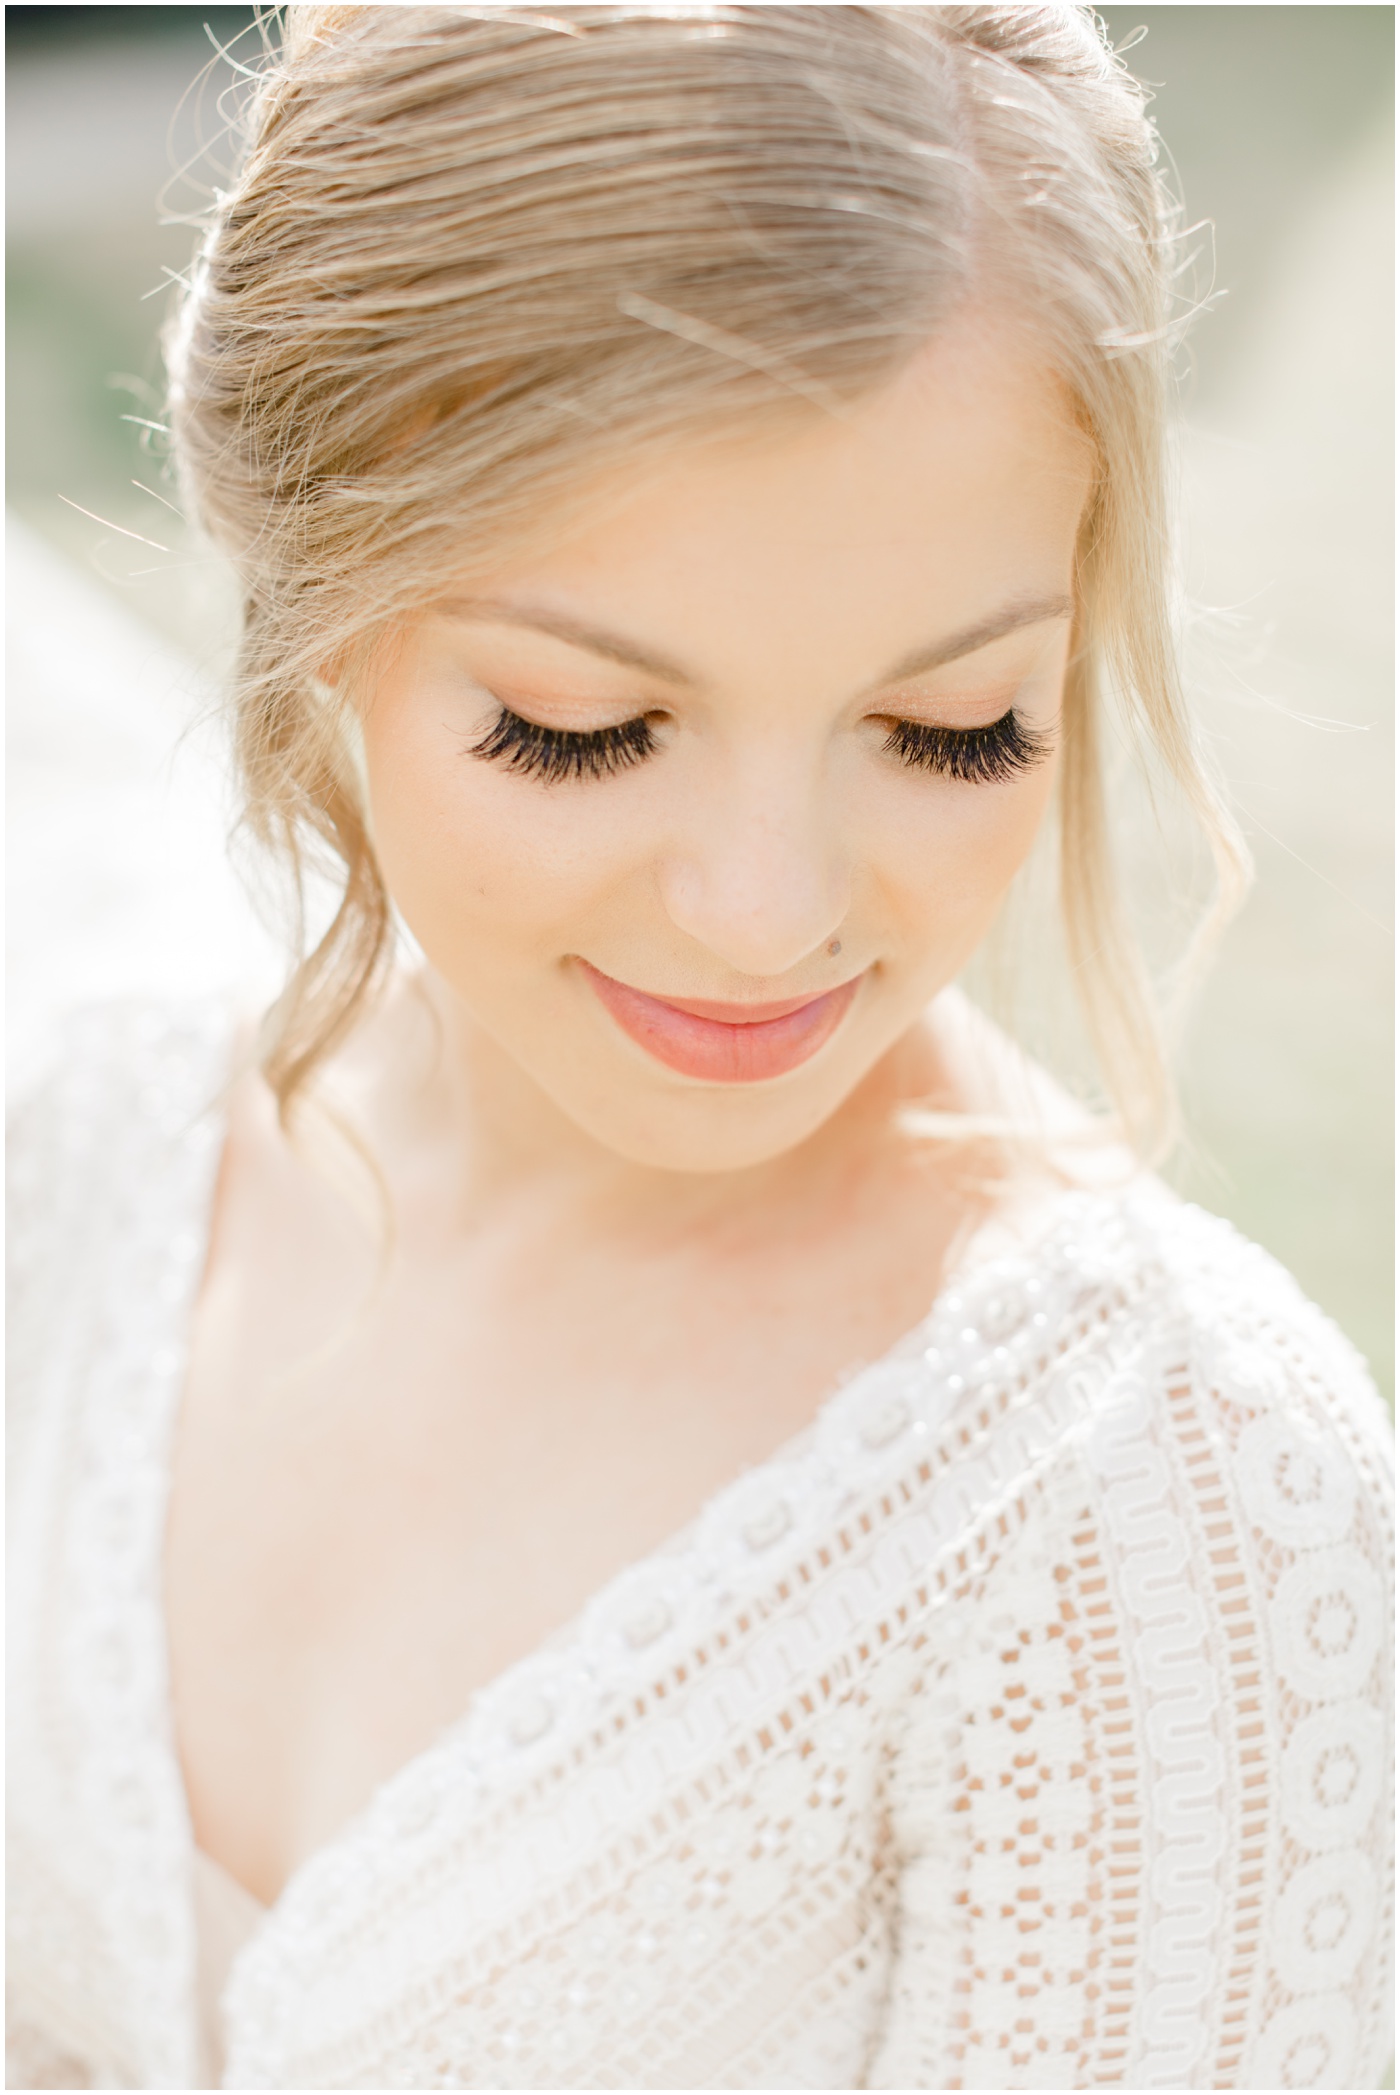 Houston bridal session | details of the bride's hair and makeup